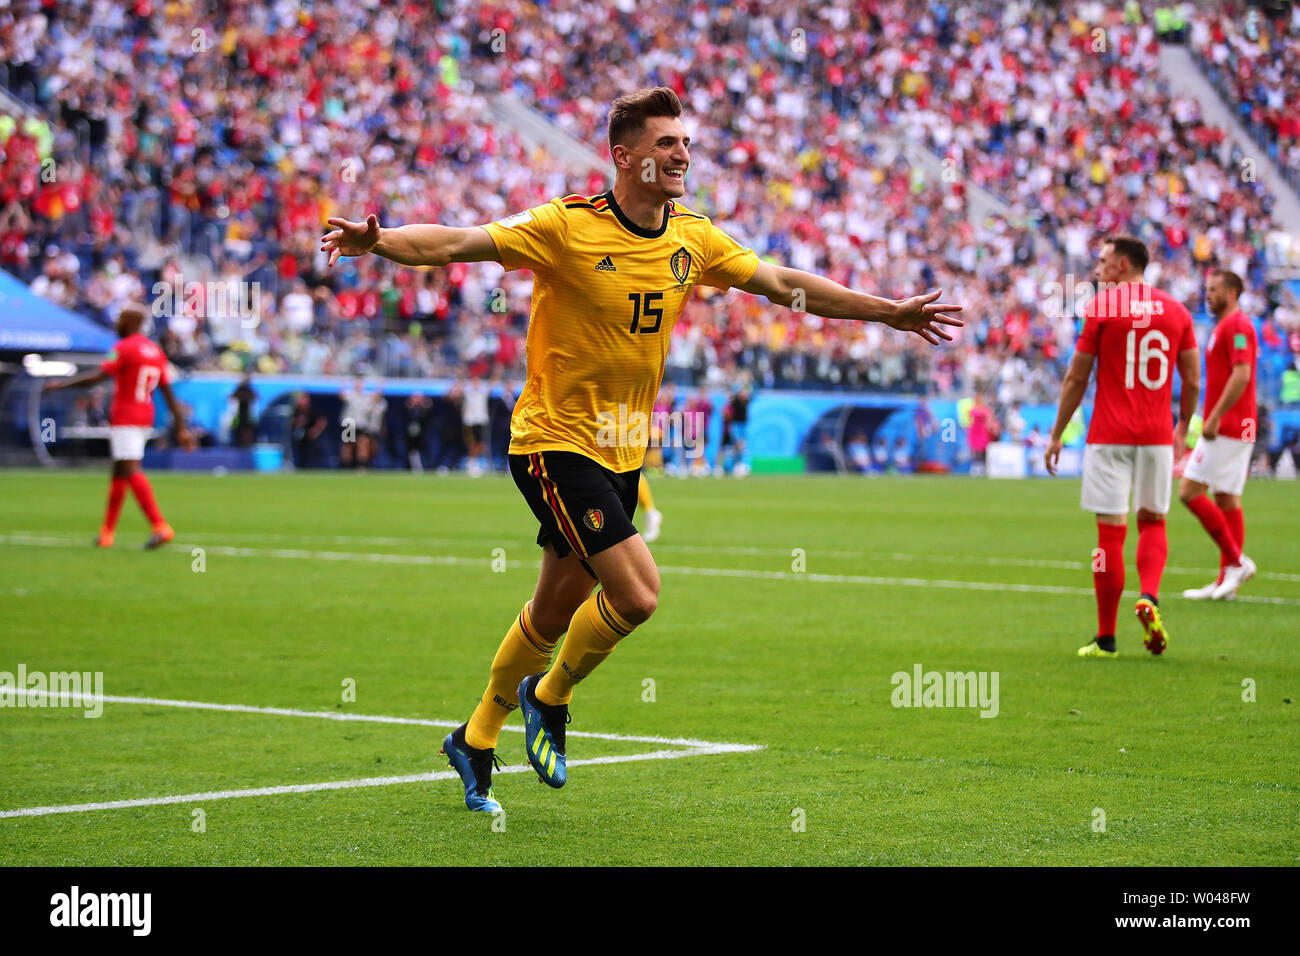 Thomas Meunier of Belgium celebrates scoring the opening goal during the 2018 FIFA World Cup third place play-off match at the Saint Petersburg Stadium in Saint Petersburg, Russia on July 14, 2018. Belgium beat England 2-0 to finish third. Photo by Chris Brunskill/UPI Stock Photo